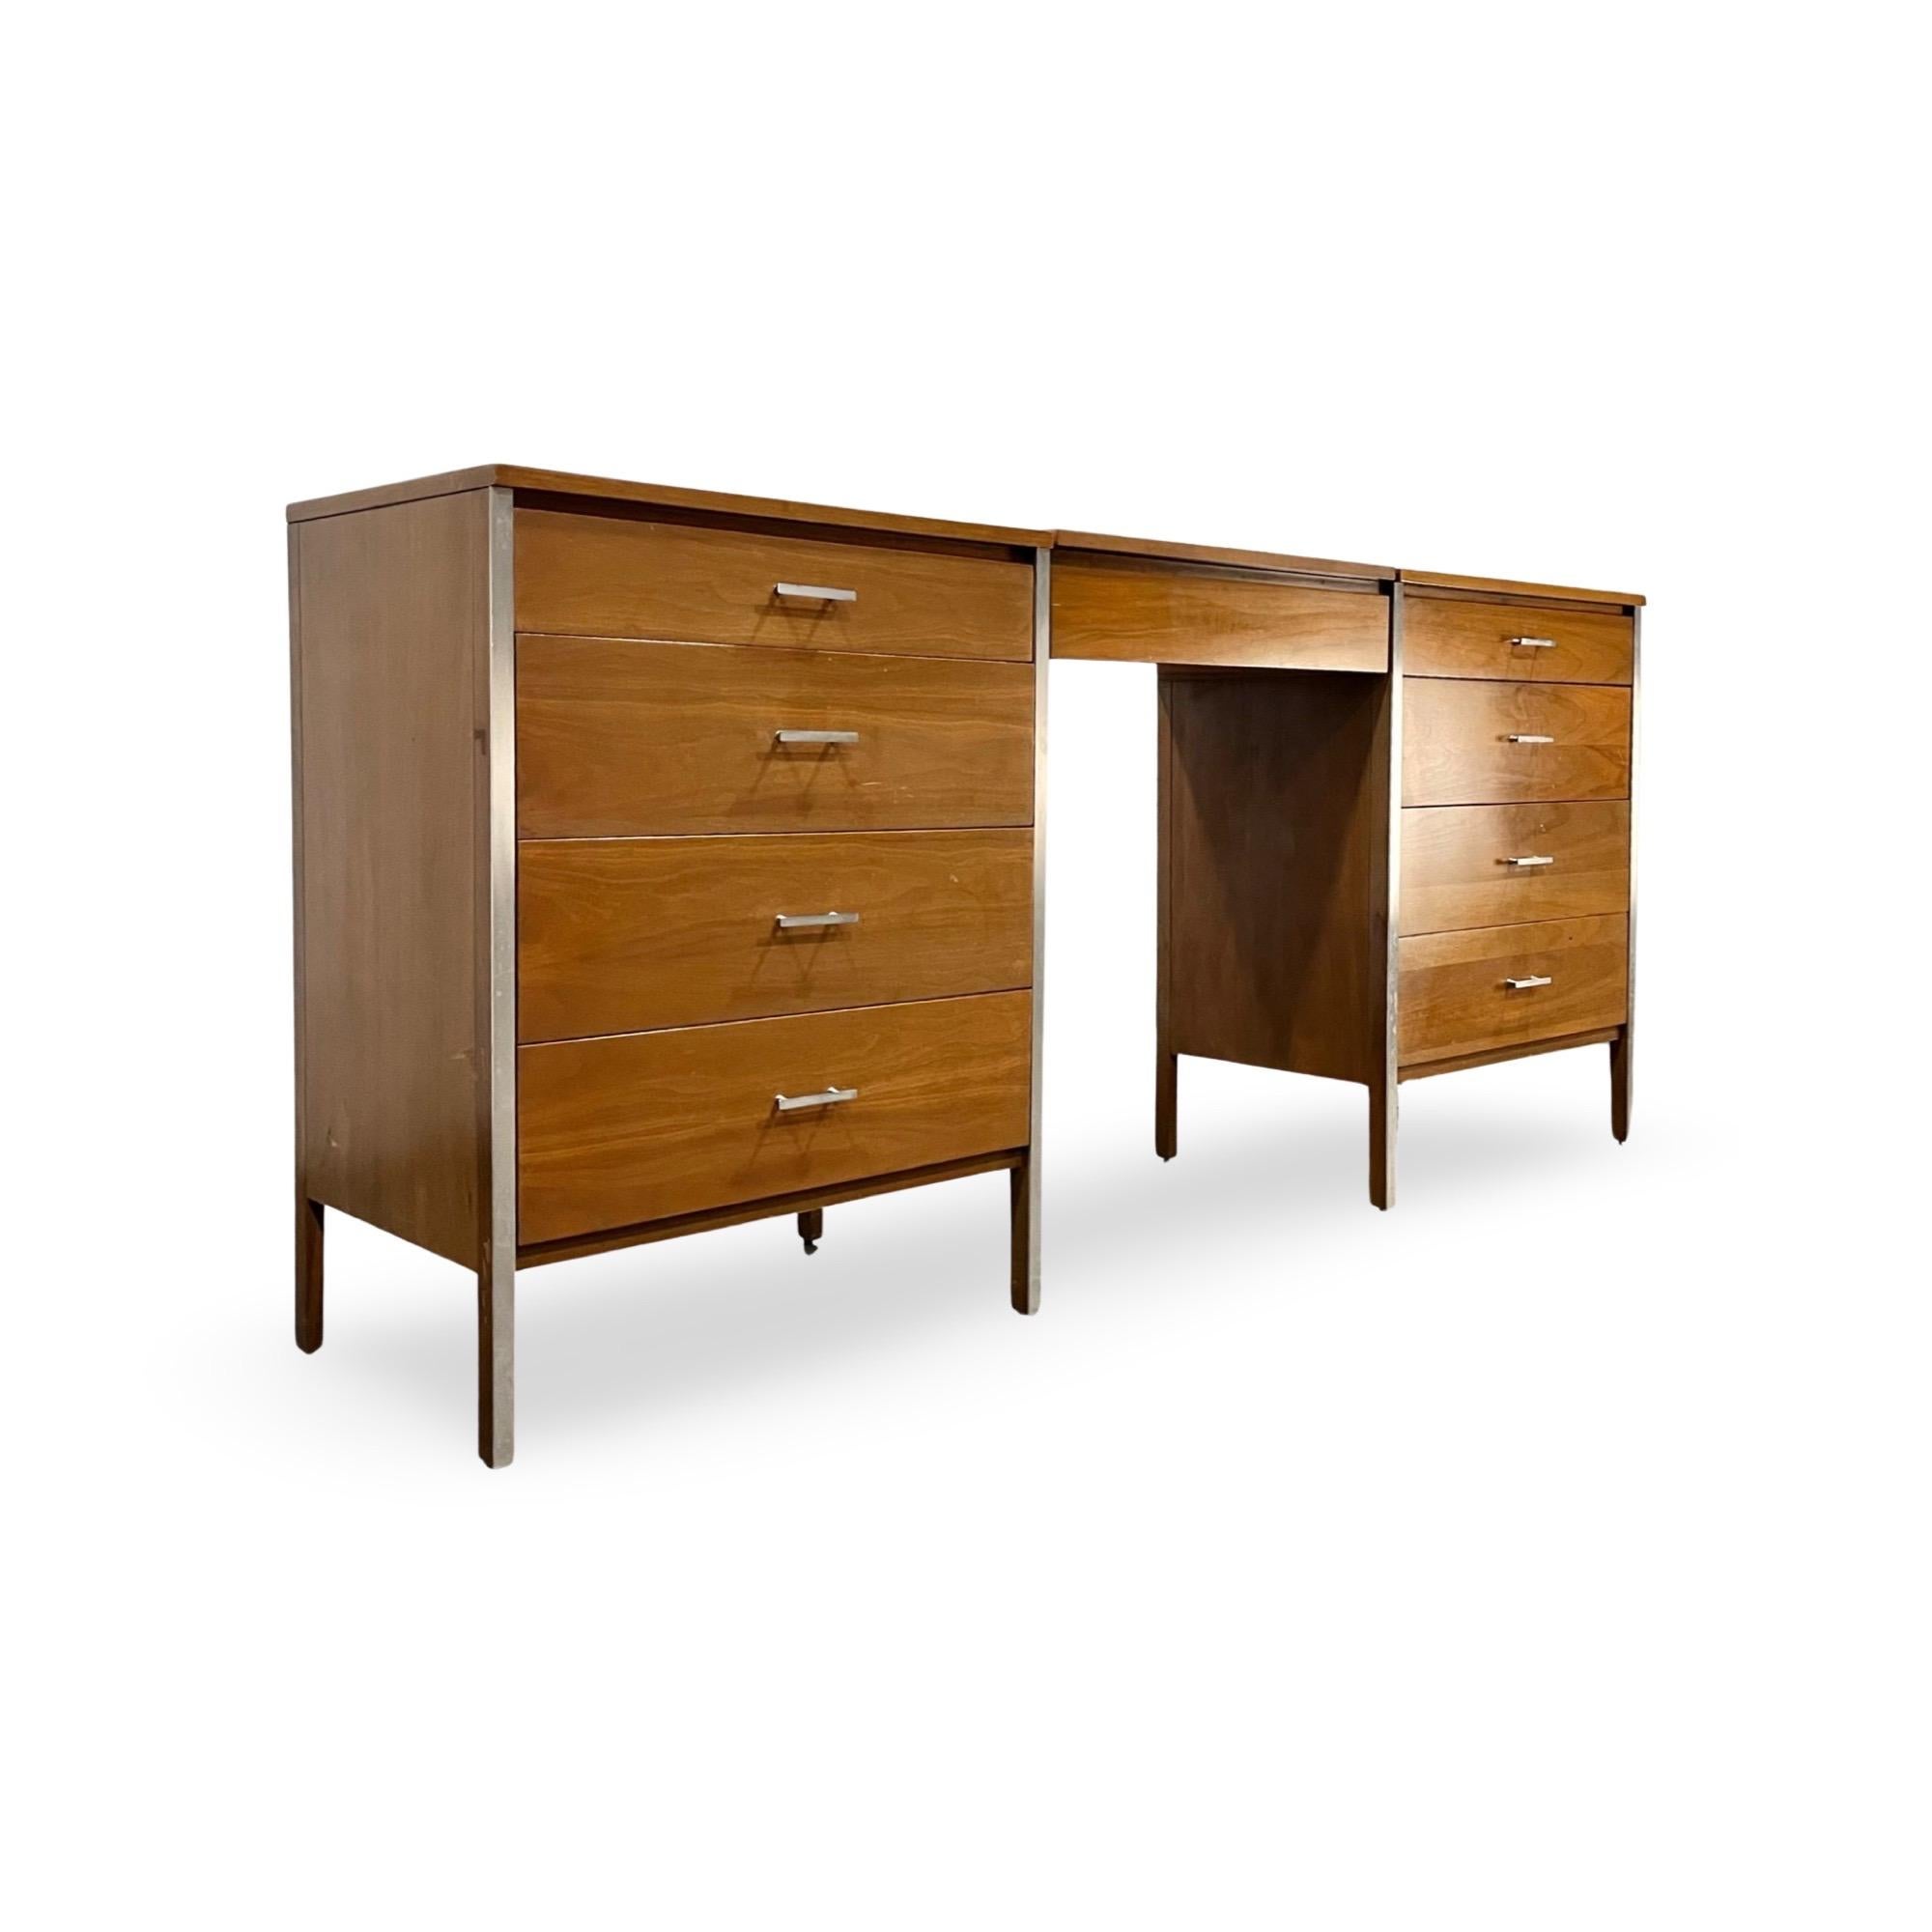 American Paul Mccobb for Calvin Linear 3 Piece Mid Century Modern Vanity Chest Set For Sale